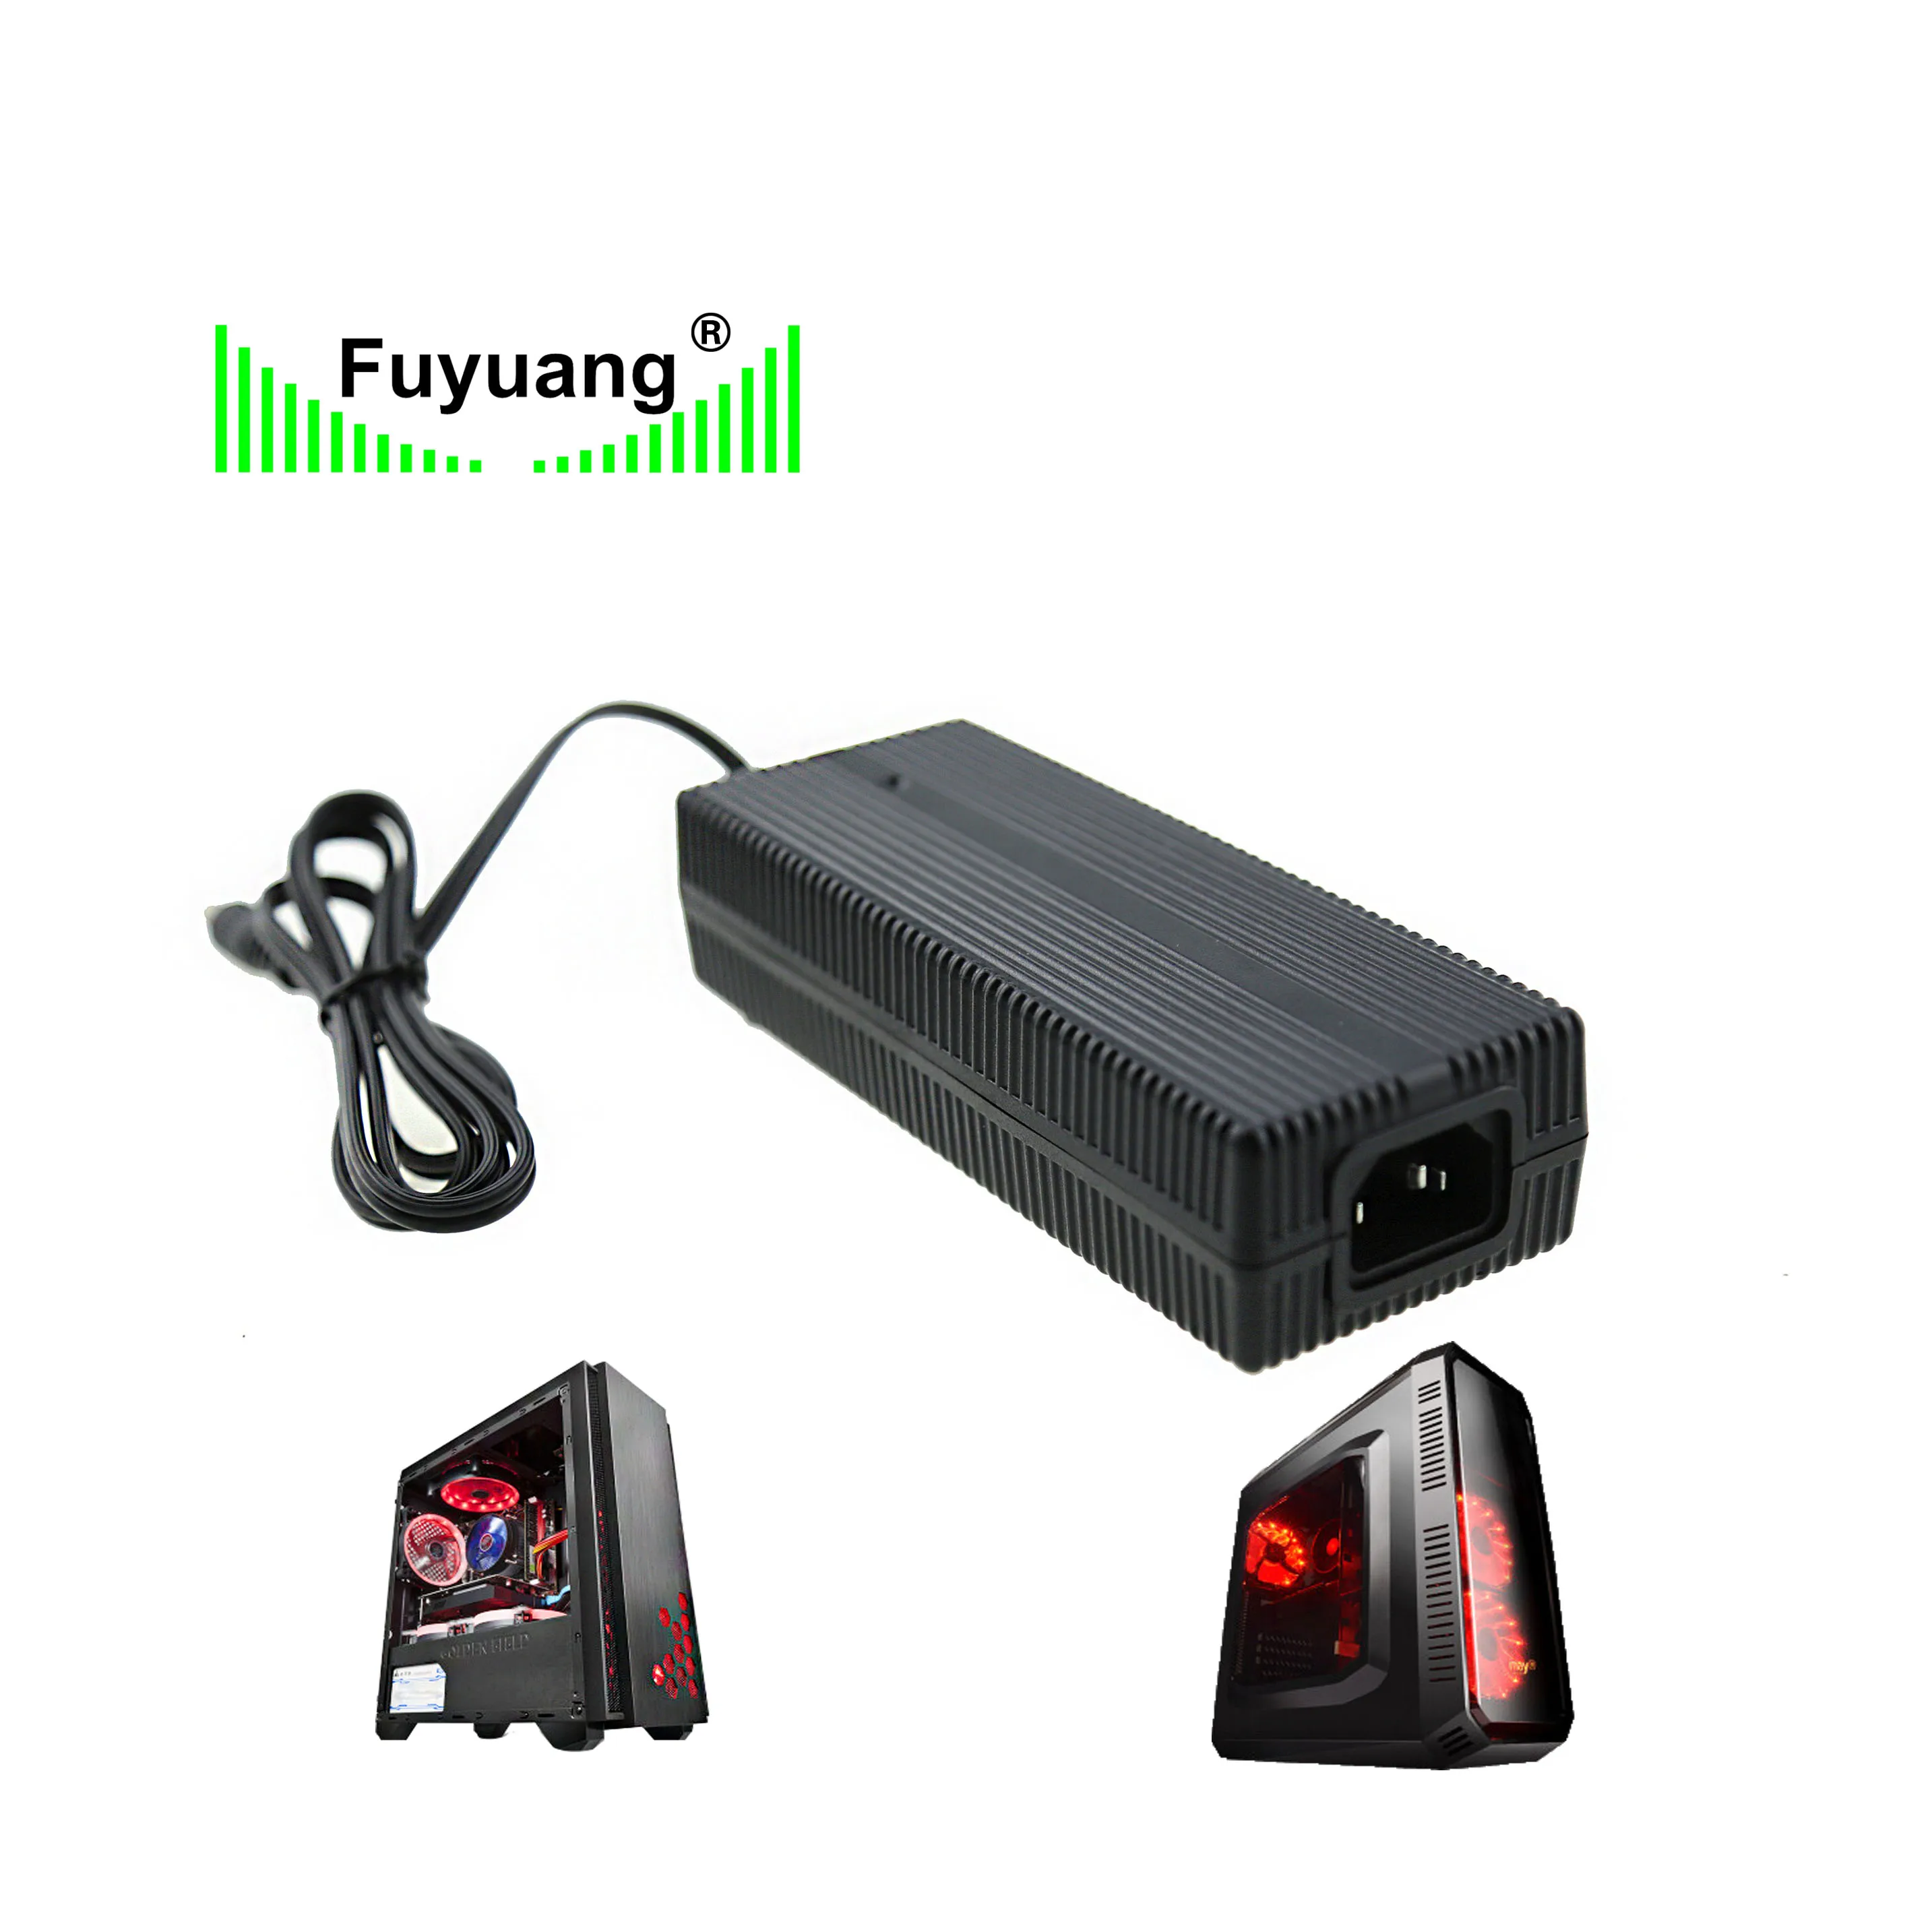 

fuyuang Desktop style 12v 24V 1A 2A 3A 5A 10A 12A 15A Power Supply AC to DC Power Adapter